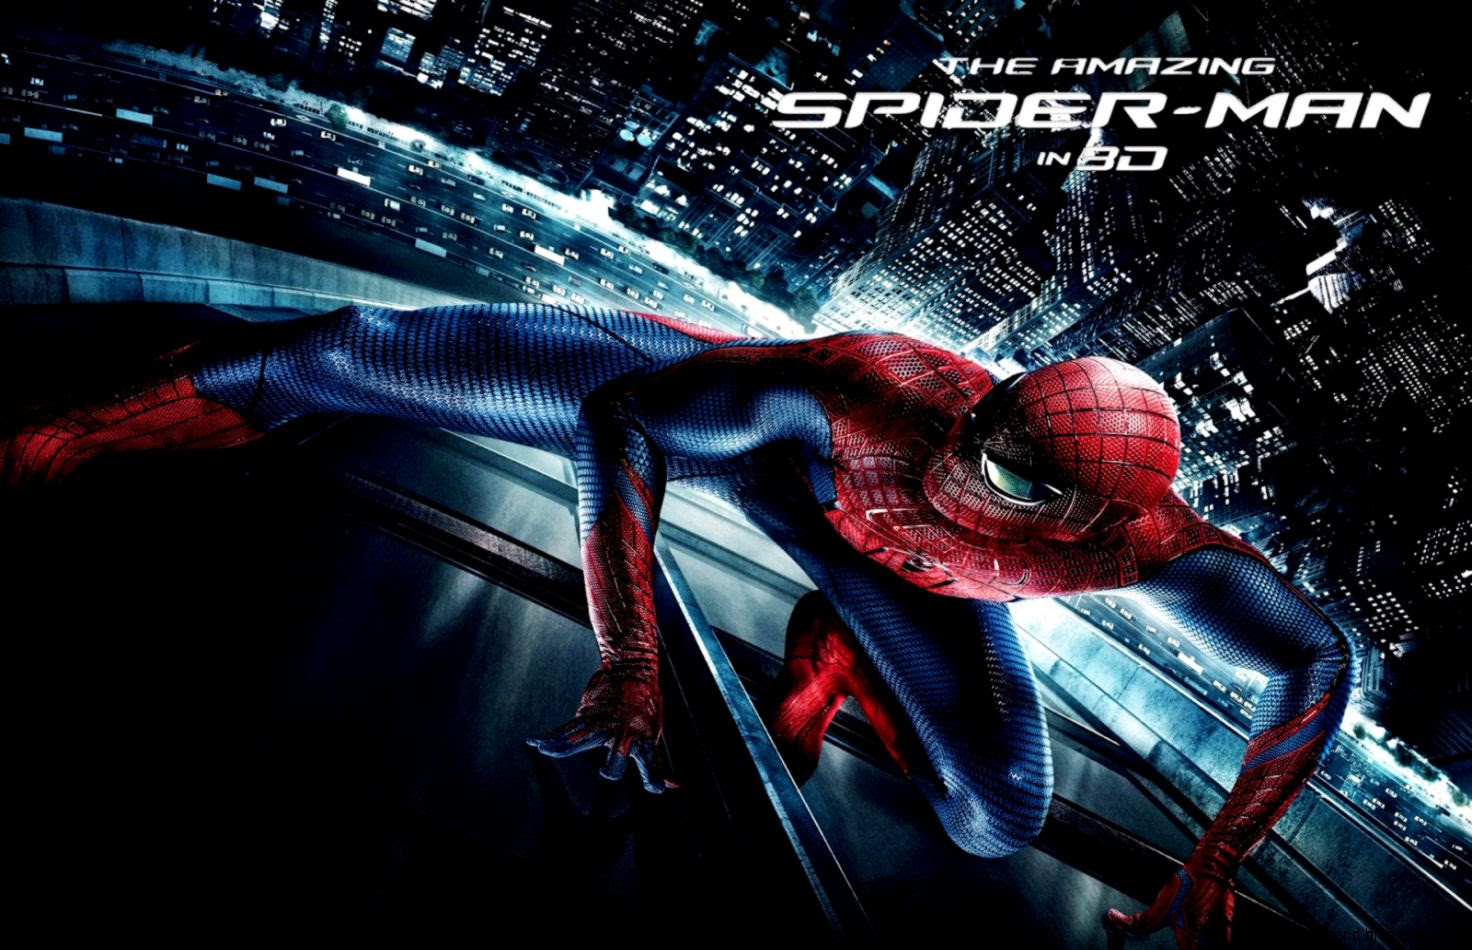 The Amazing Spider Man 2 Wallpaper Hd 1080p Inspirational